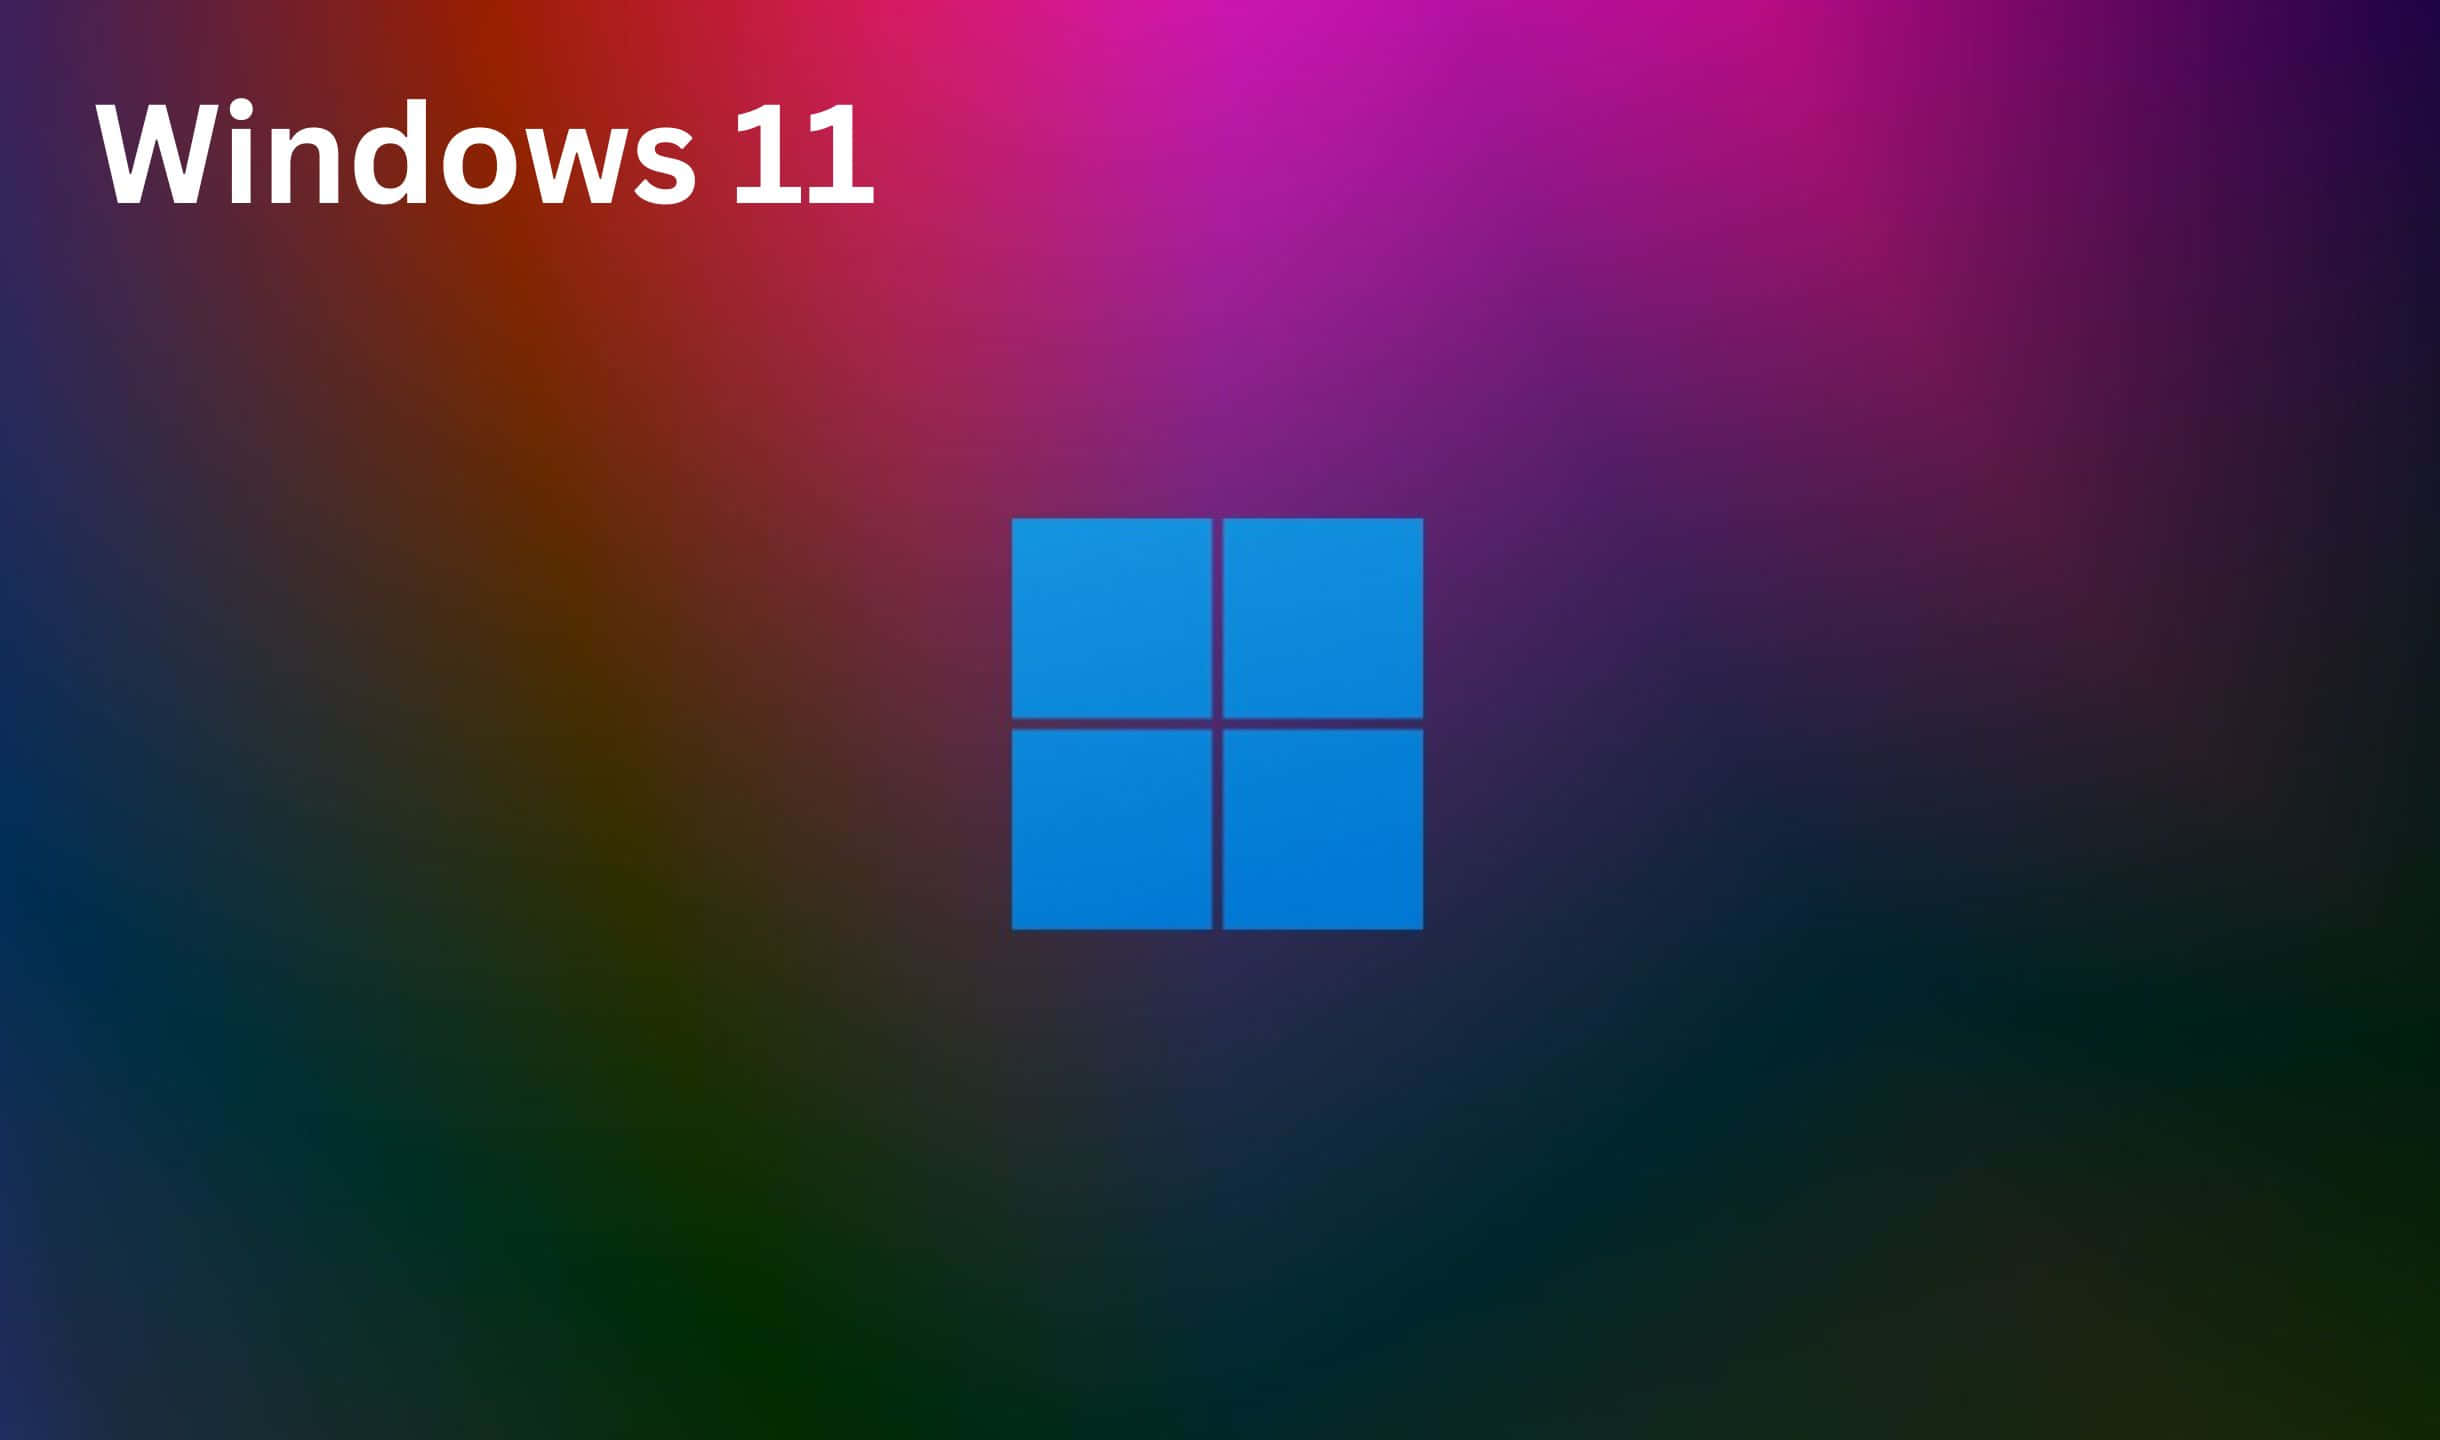 Download Windows 10 Logo On A Colorful Background | Wallpapers.com